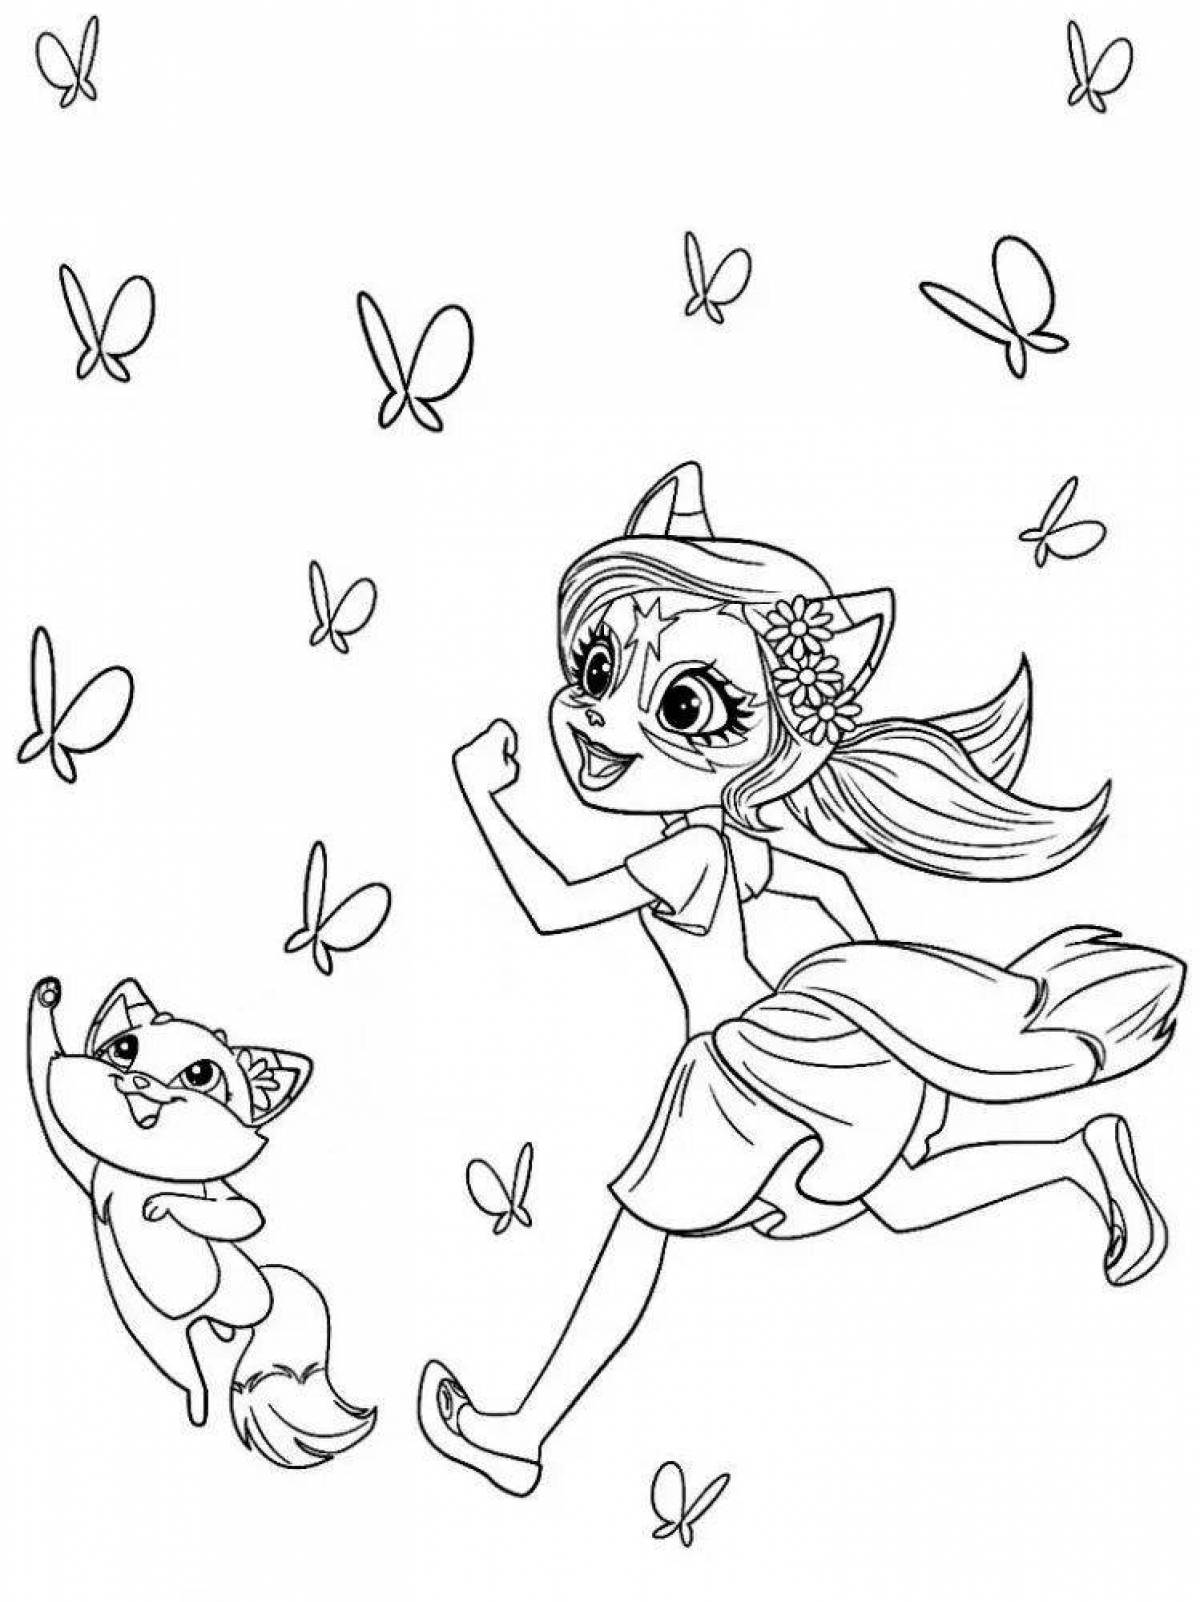 Coloring pages enchancimals